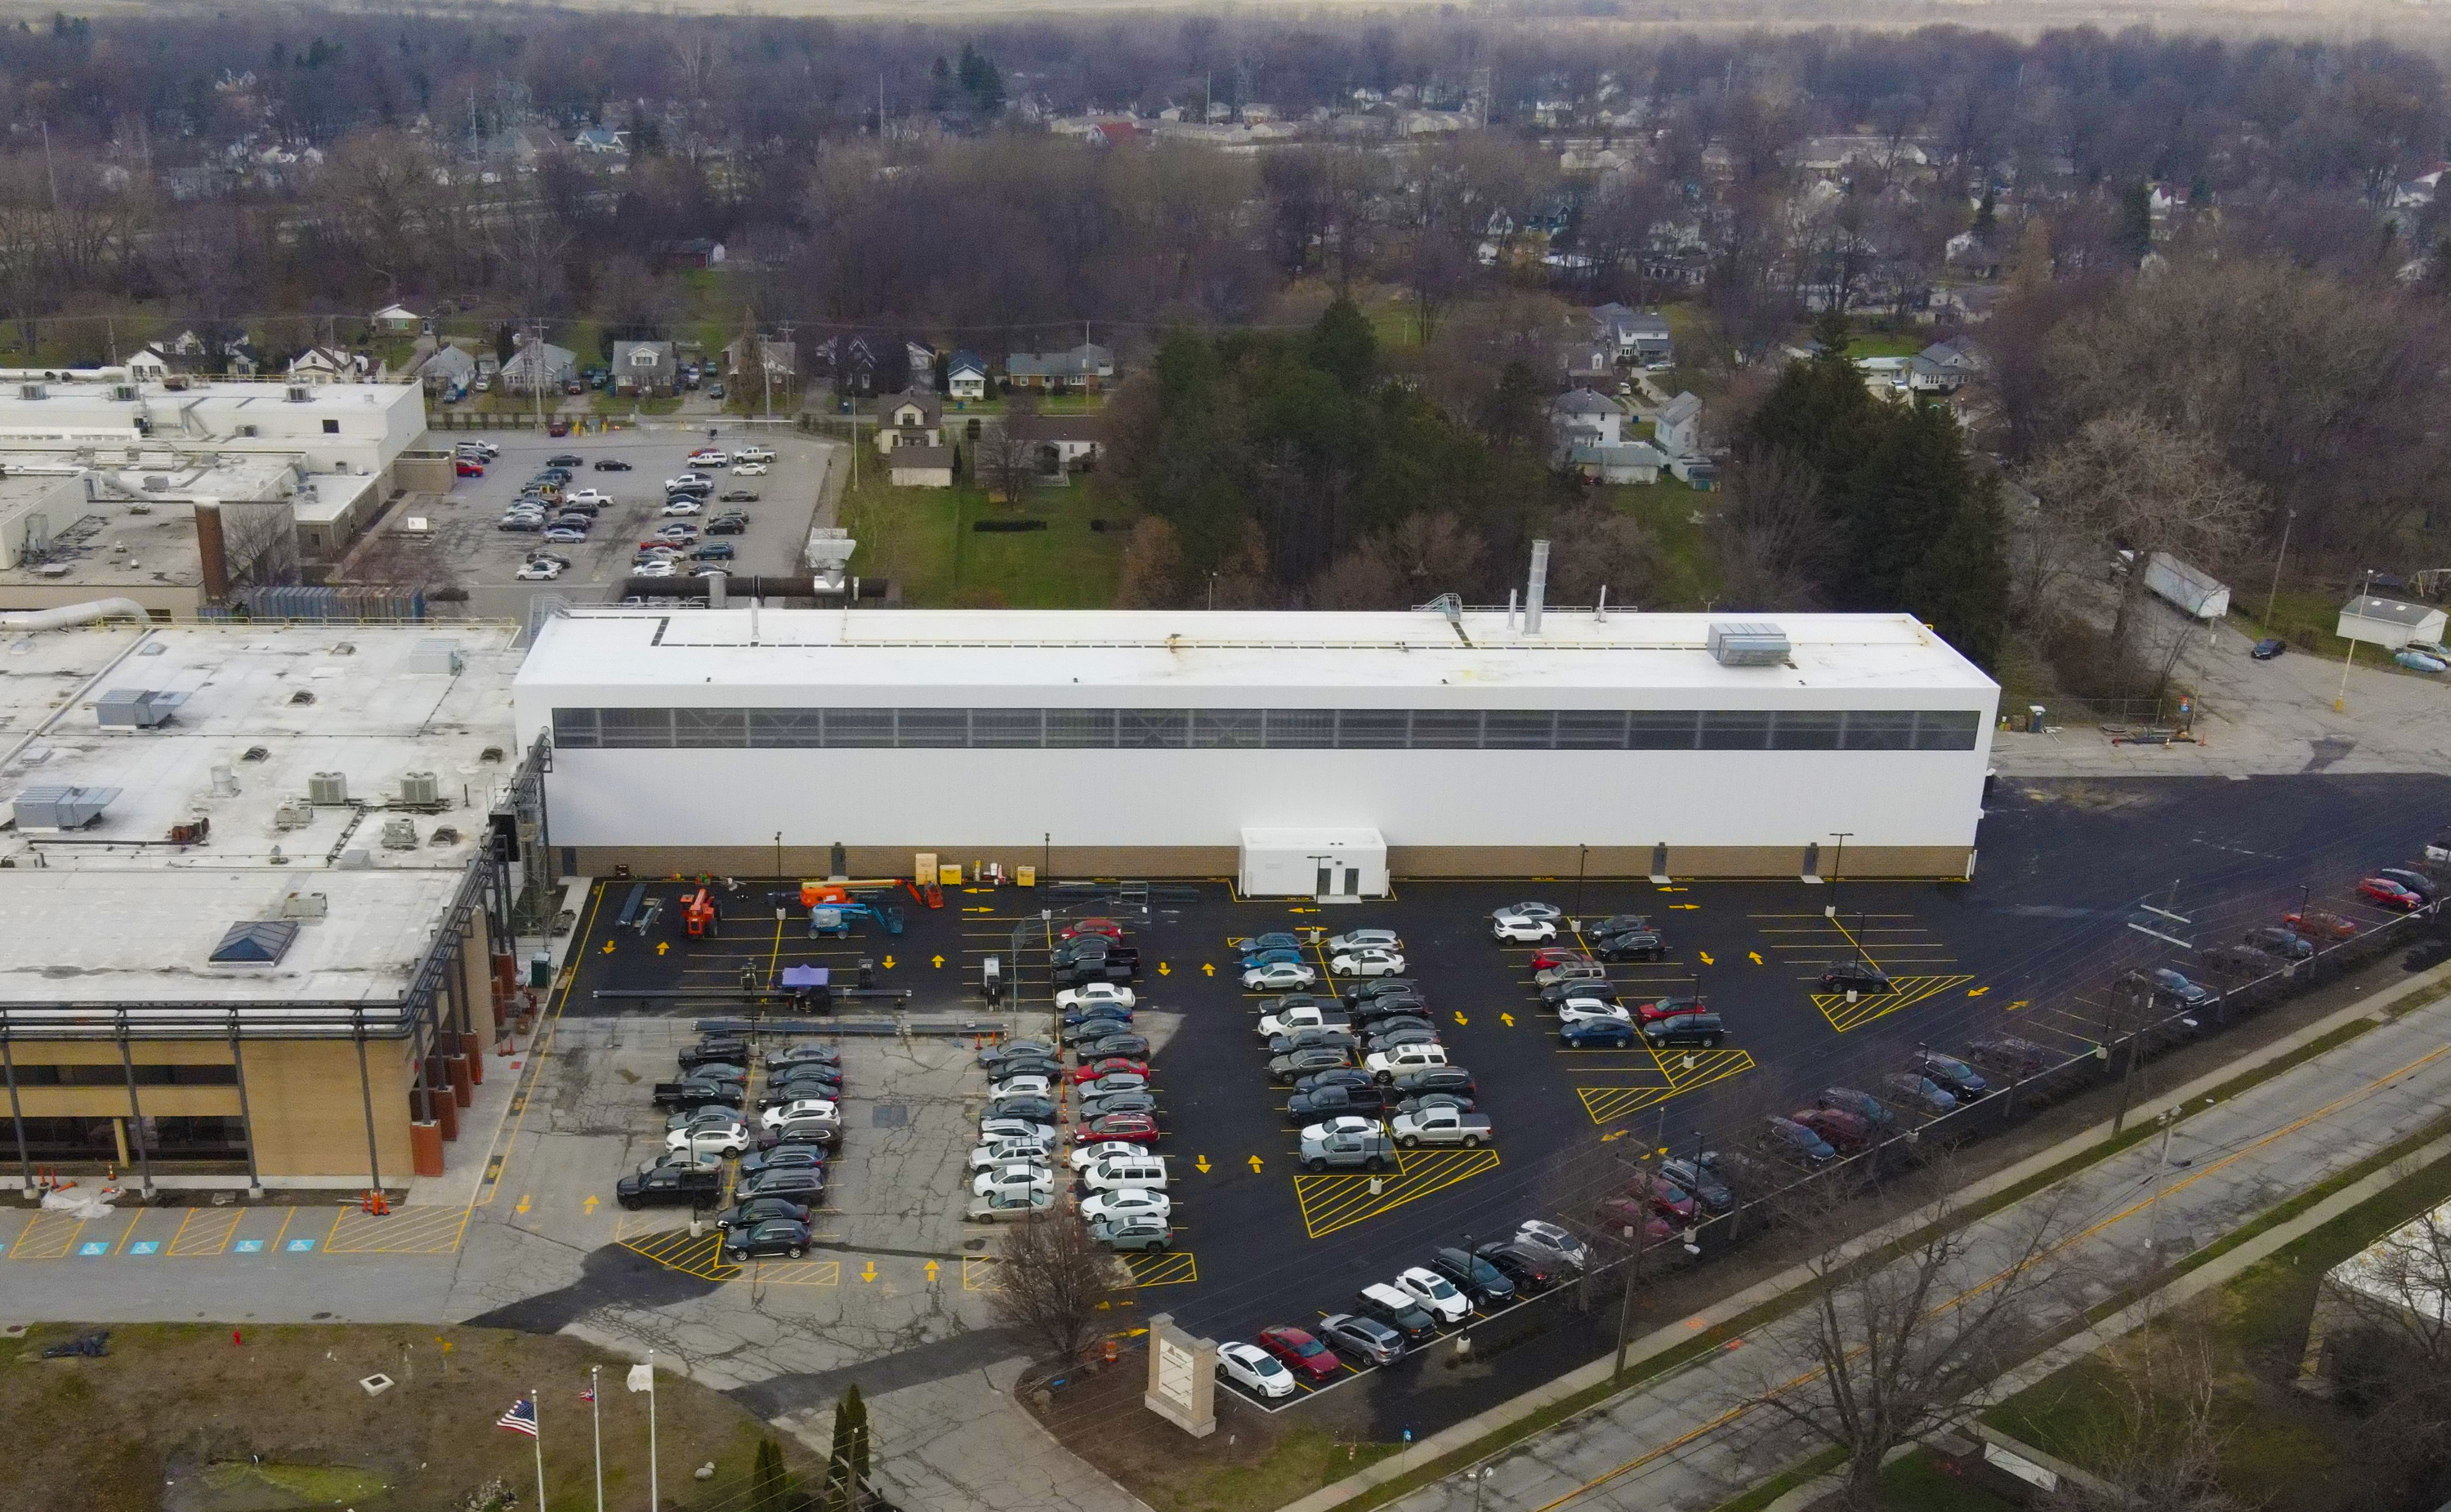 Cleveland Construction Completes Manufacturing Facility Expansion in Painesville, Ohio